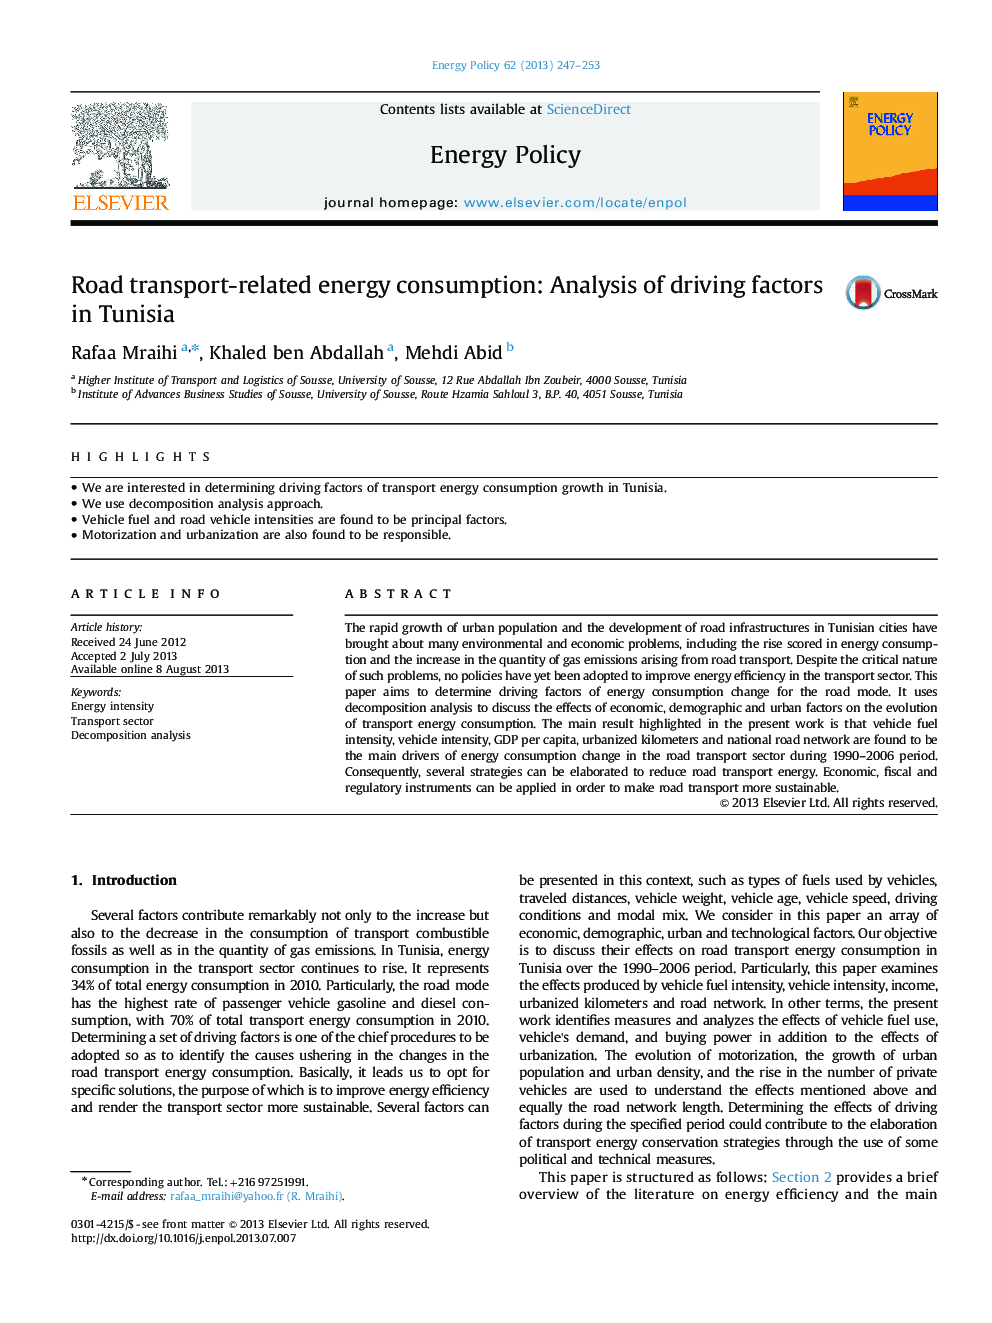 Road transport-related energy consumption: Analysis of driving factors in Tunisia